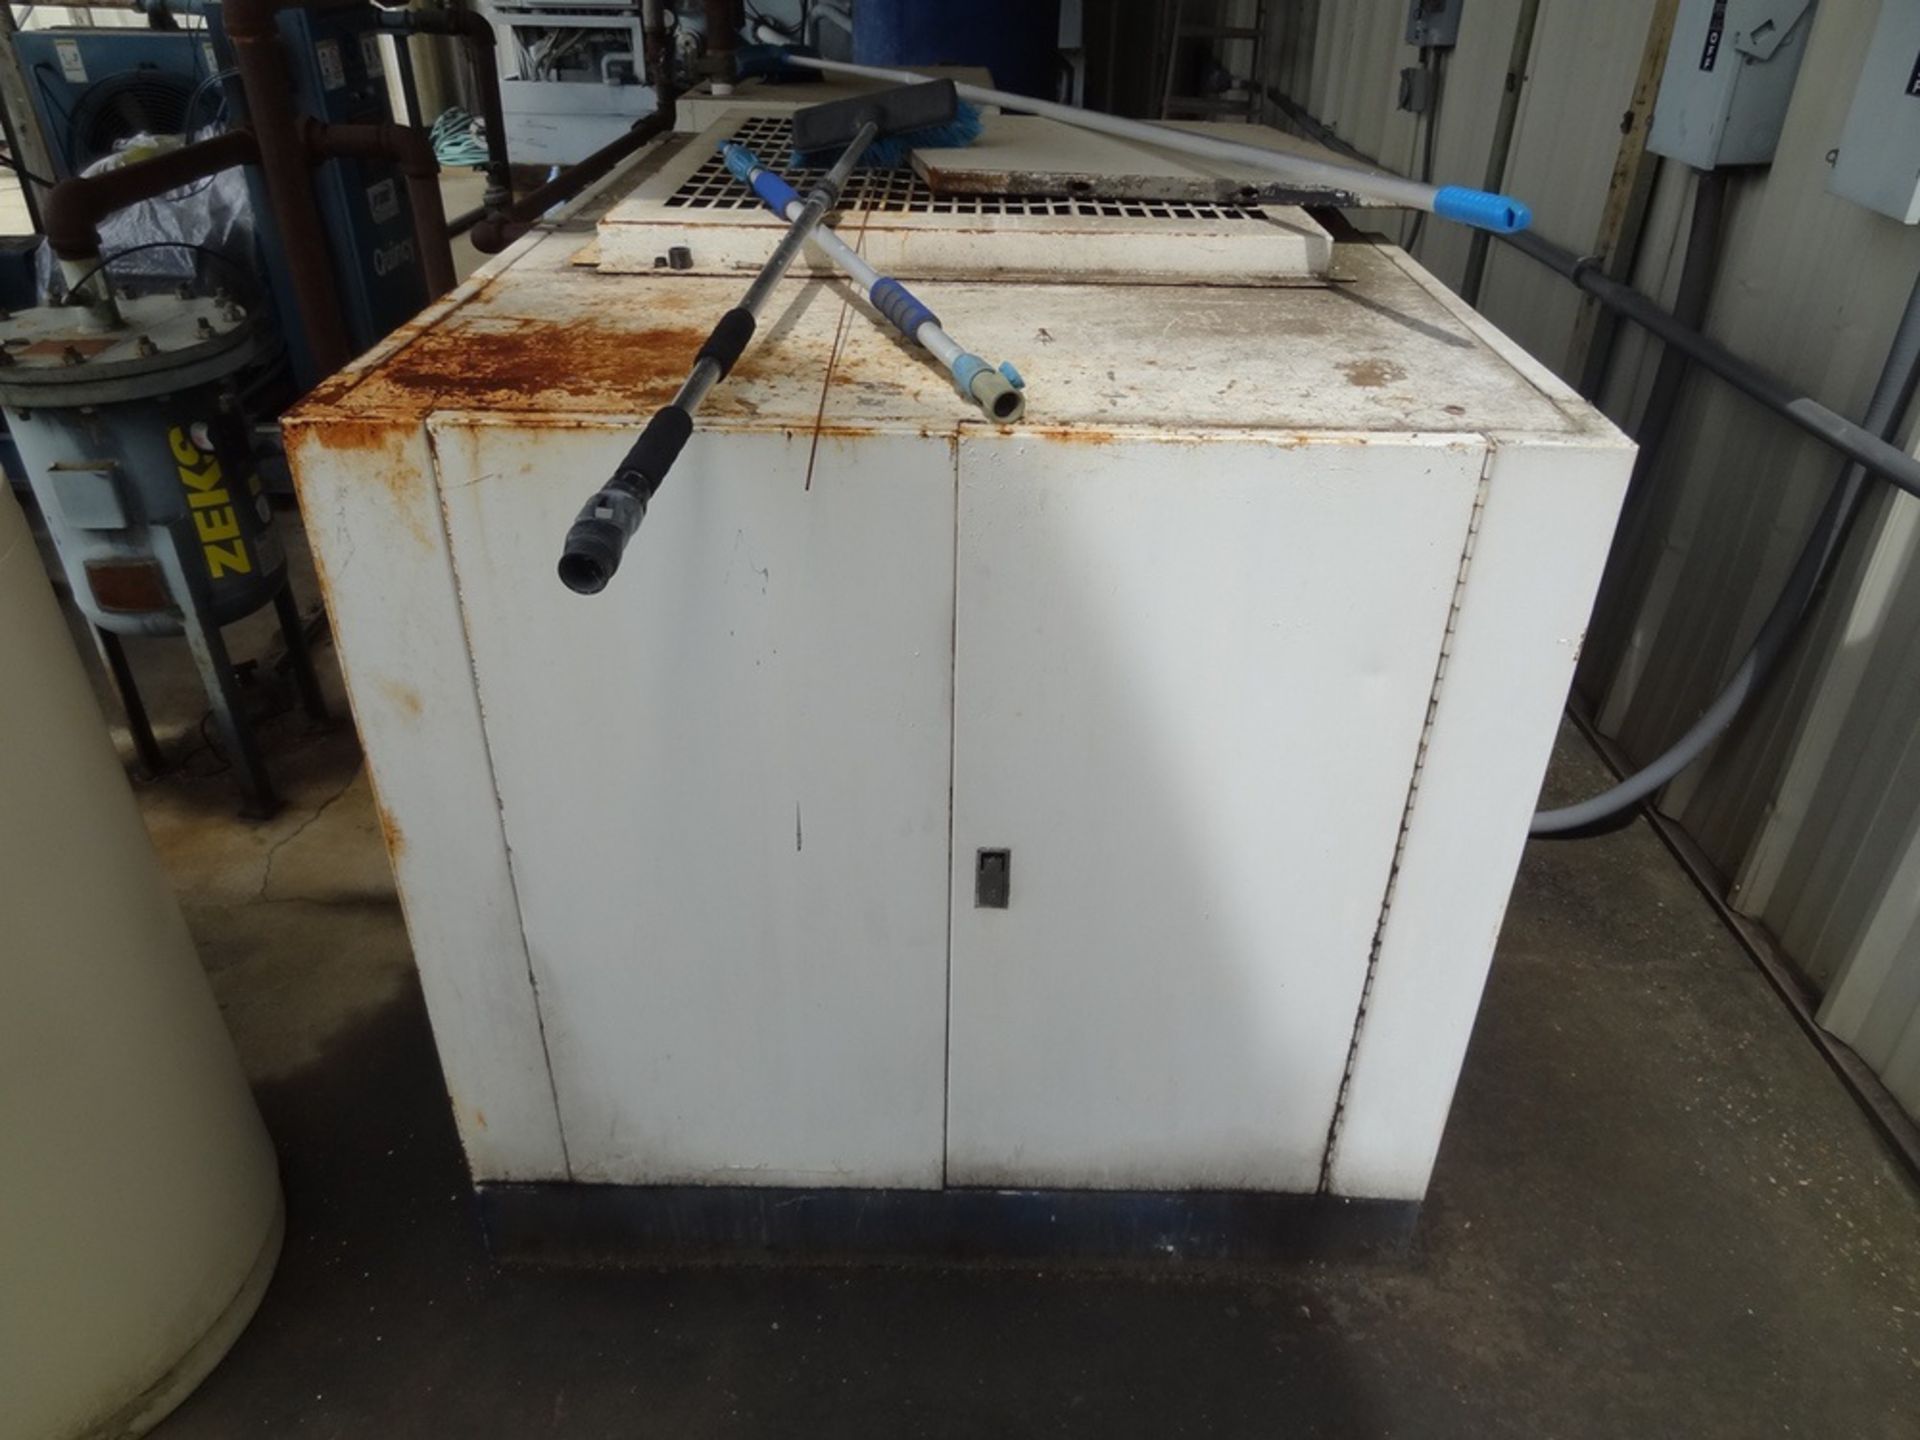 Ingersoll-Rand Model SSR-2000 50hp Air Compressor, Hours Meter: 17,500 hrs | Rigging Fee: $400 - Image 2 of 5